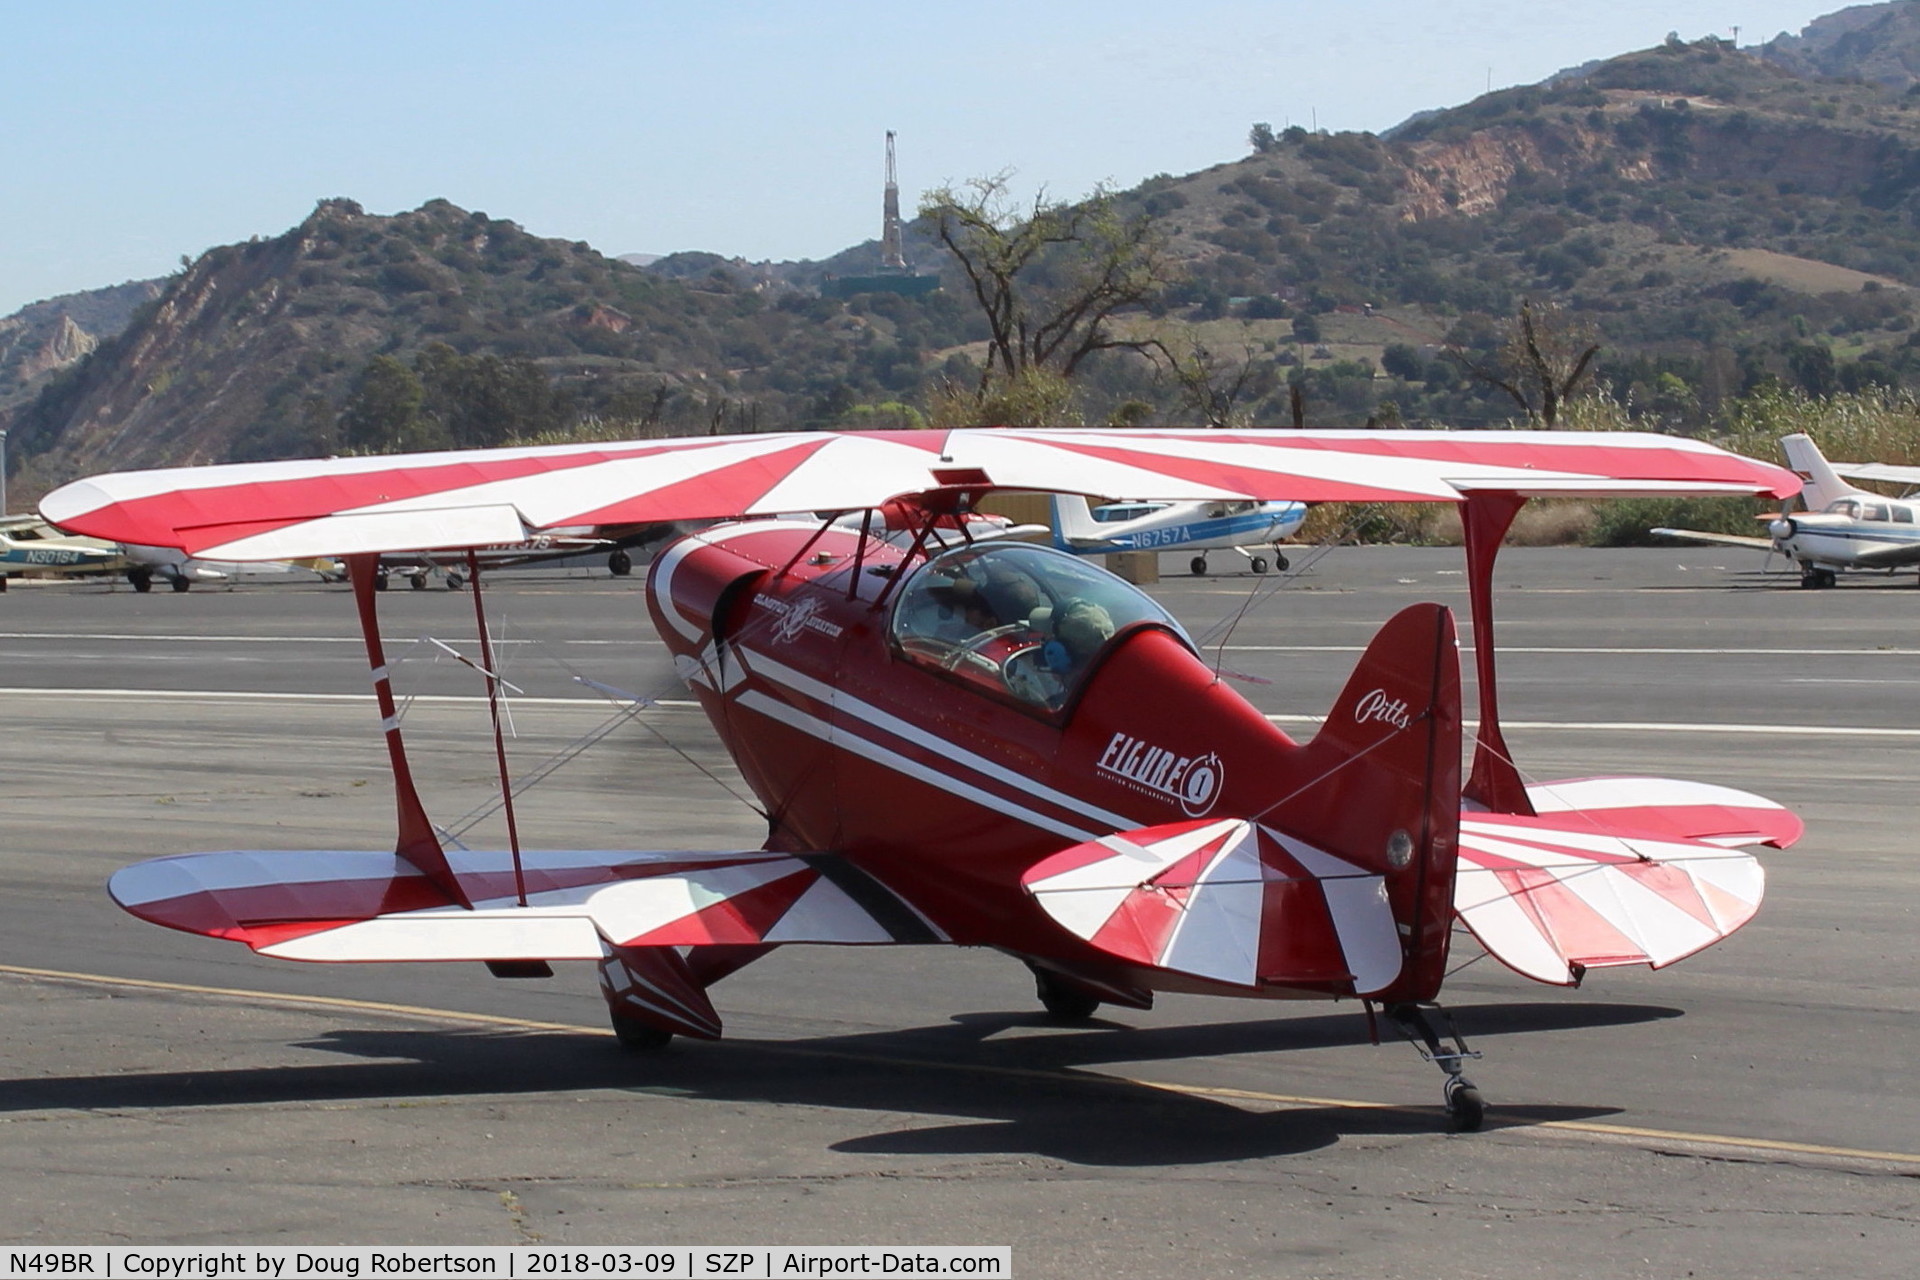 N49BR, Pitts S-2A Special C/N 2212, 1983 Aerotek PITTS S-2A SPECIAL, Lycoming AEIO-360 180 Hp, S-turns taxi to Rwy 22